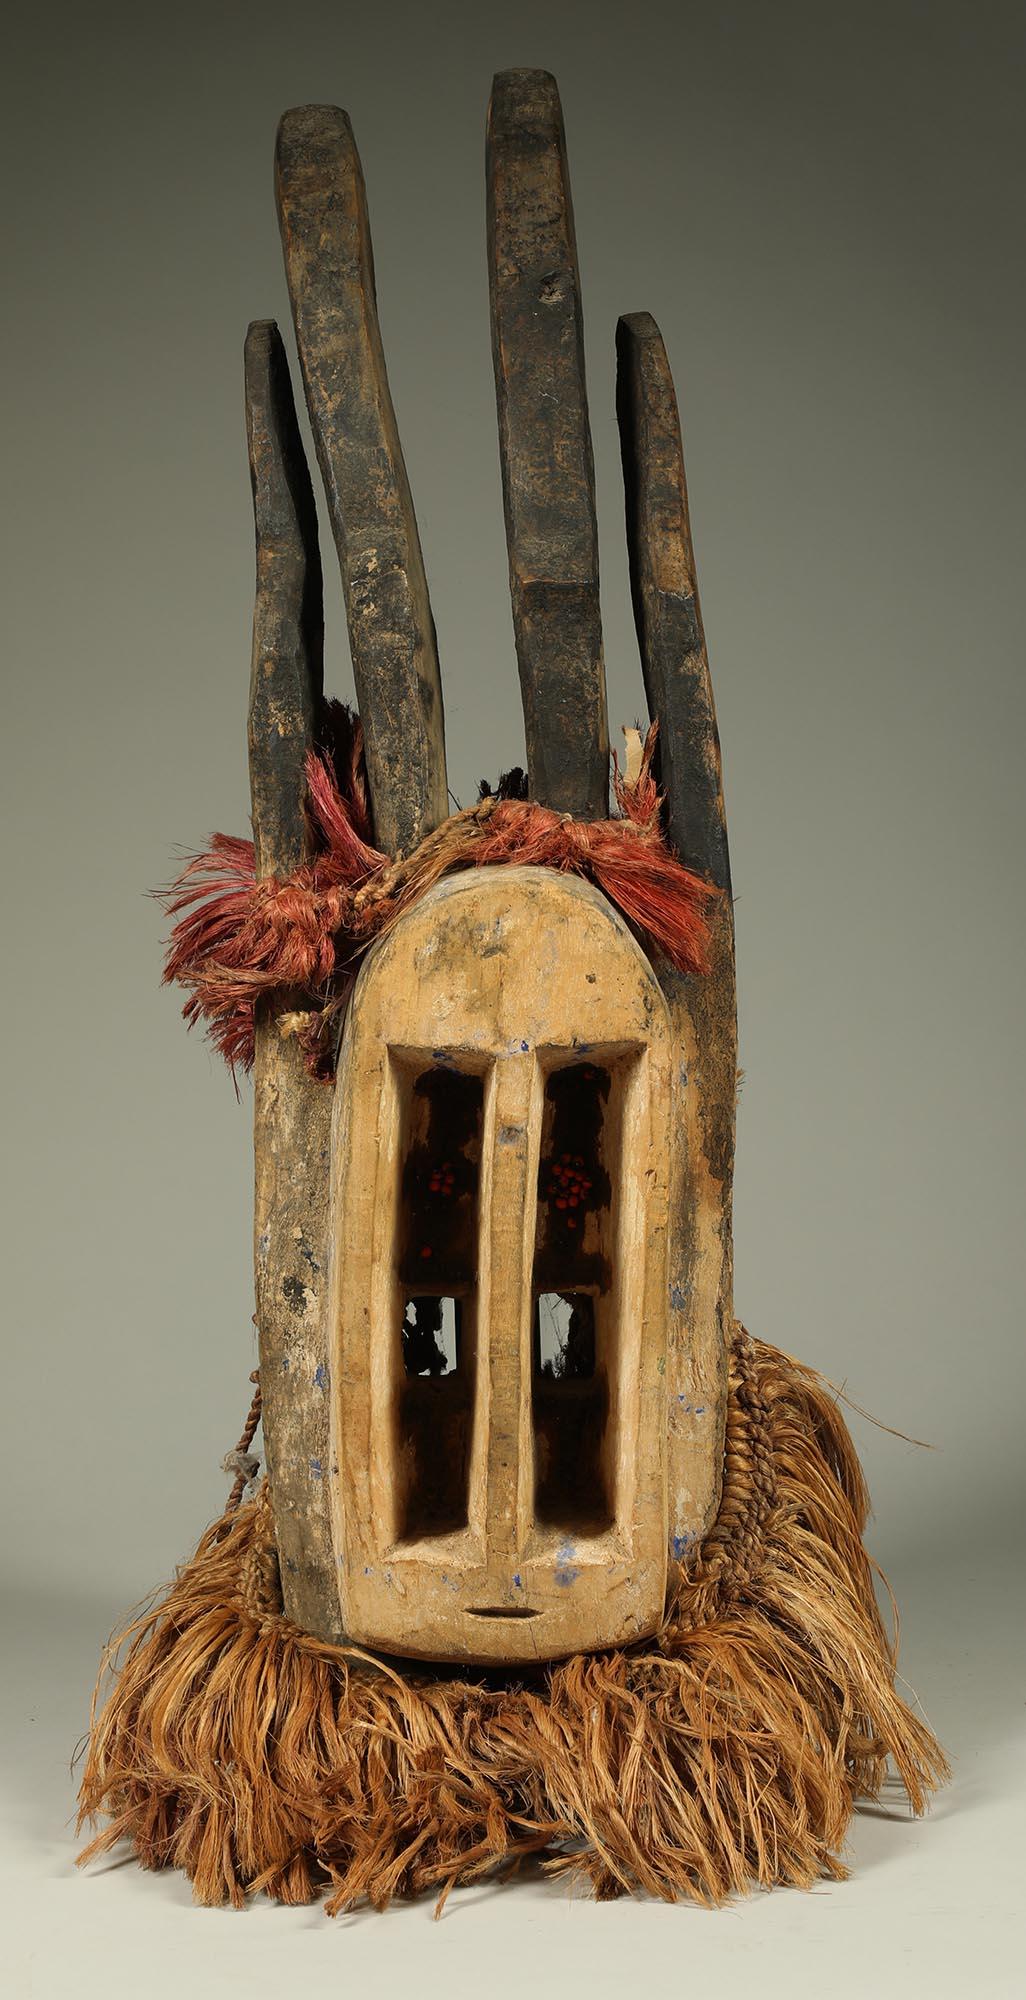 Cubist Dogon carved wood Antelope mask with attached raffia, from Mali West Africa. Tall vertical eyes, small slit mouth. Pair of carved curved blackened antelope horns rise from top of the head, long blackened ears.  With wonderful natural motion